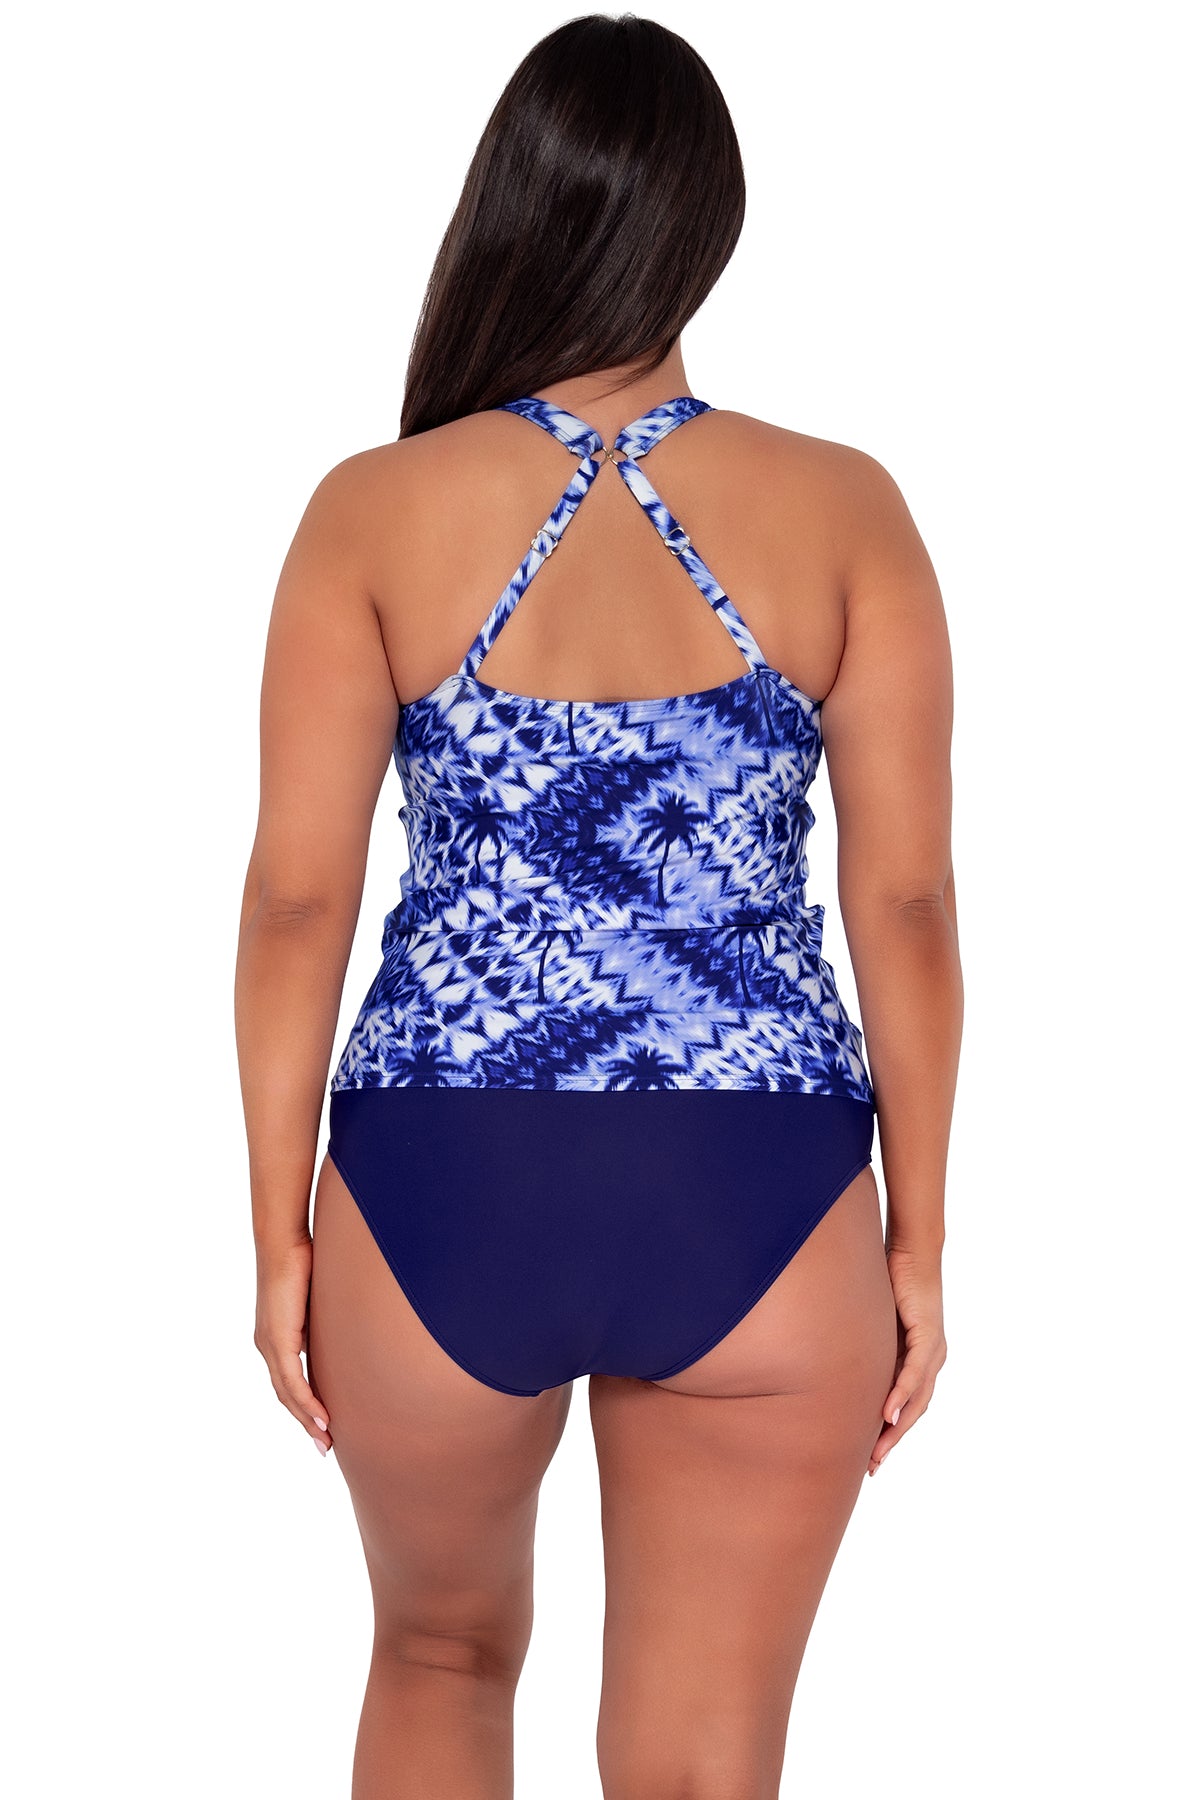 Back pose #1 of Nicki wearing Sunsets Escape Tulum Emerson Tankini Top showing crossback straps paired with Indigo Hannah High Waist